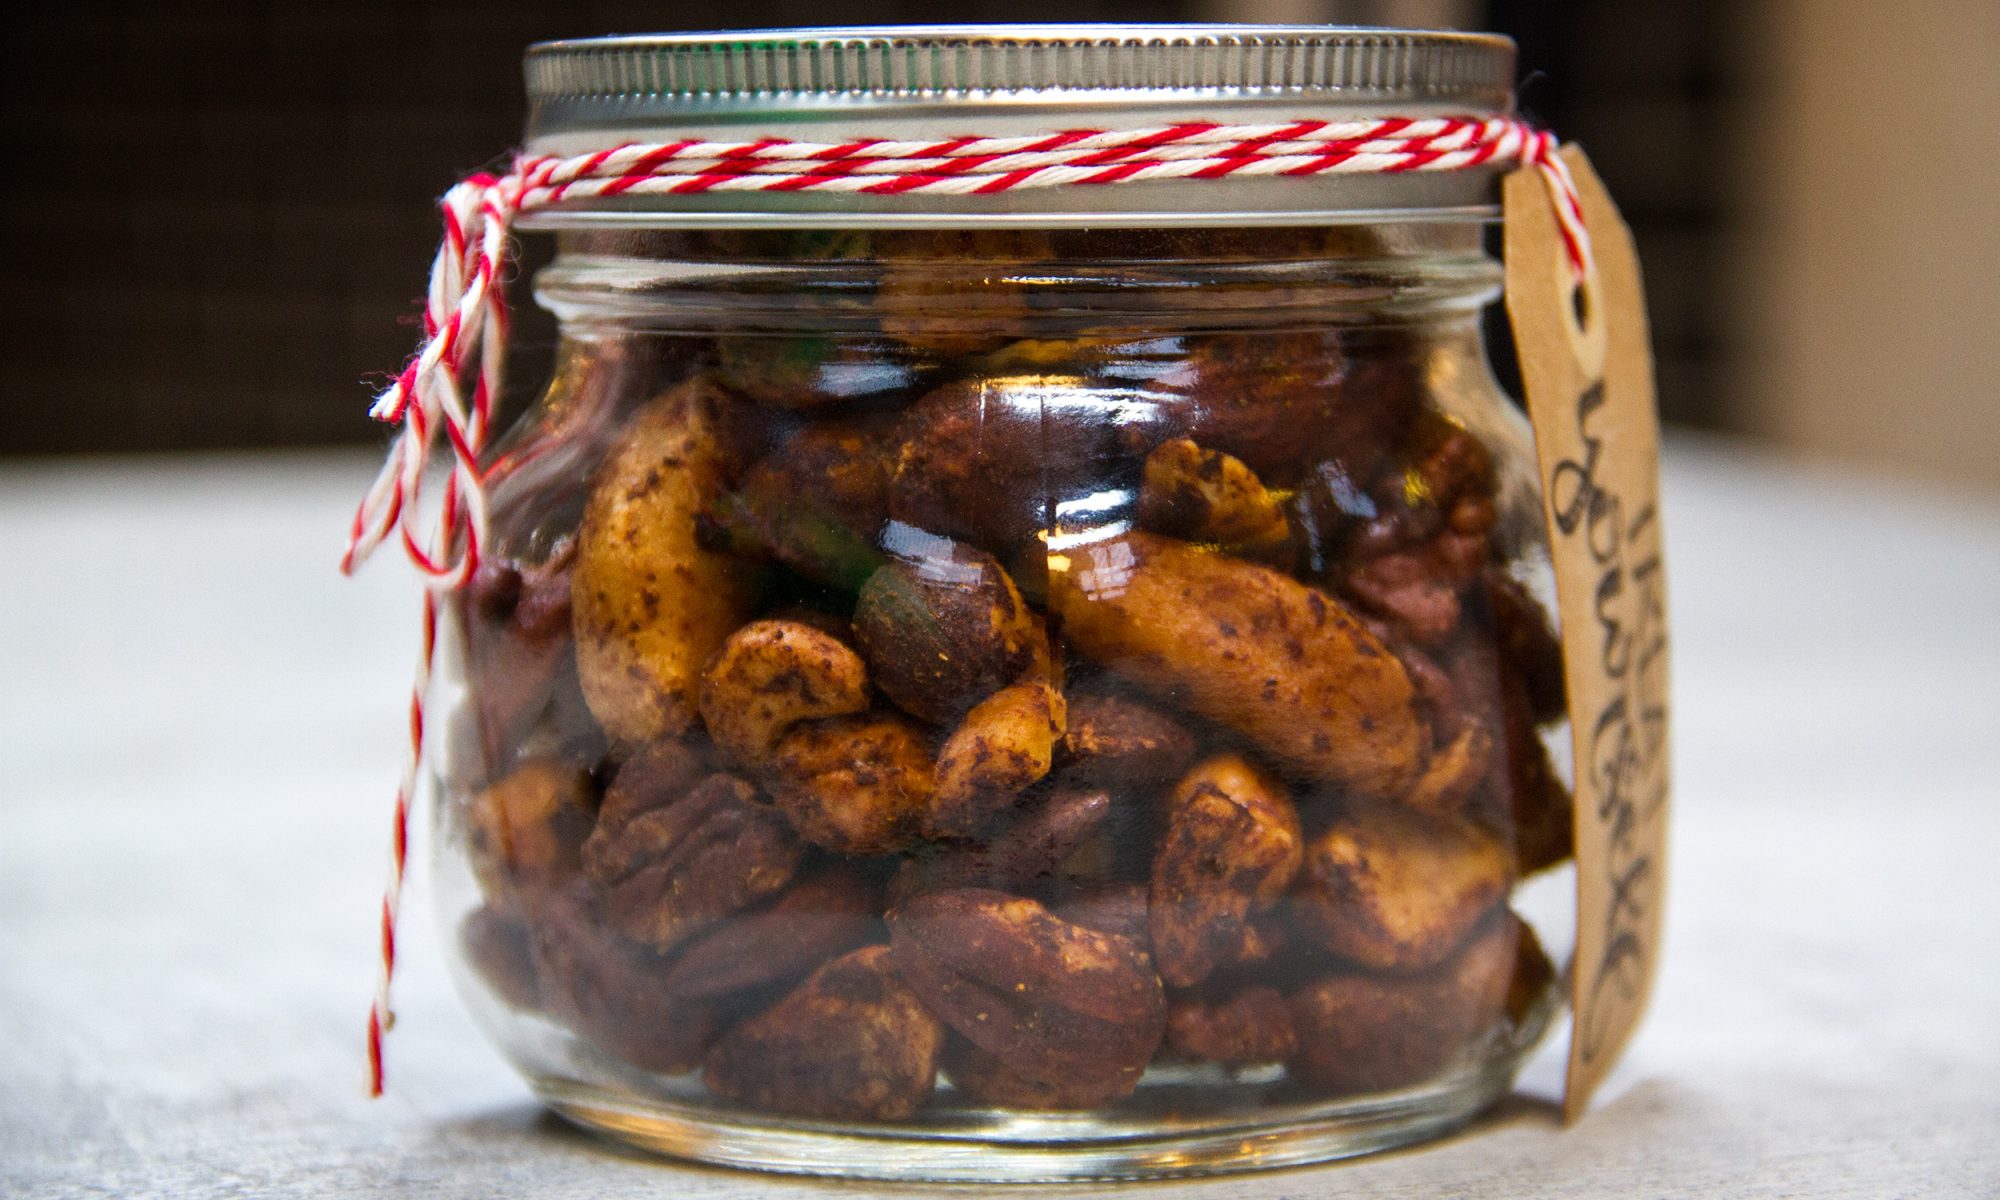 EC: Deez Spiced Nuts Are a DIY Project You Can Actually Pull Off